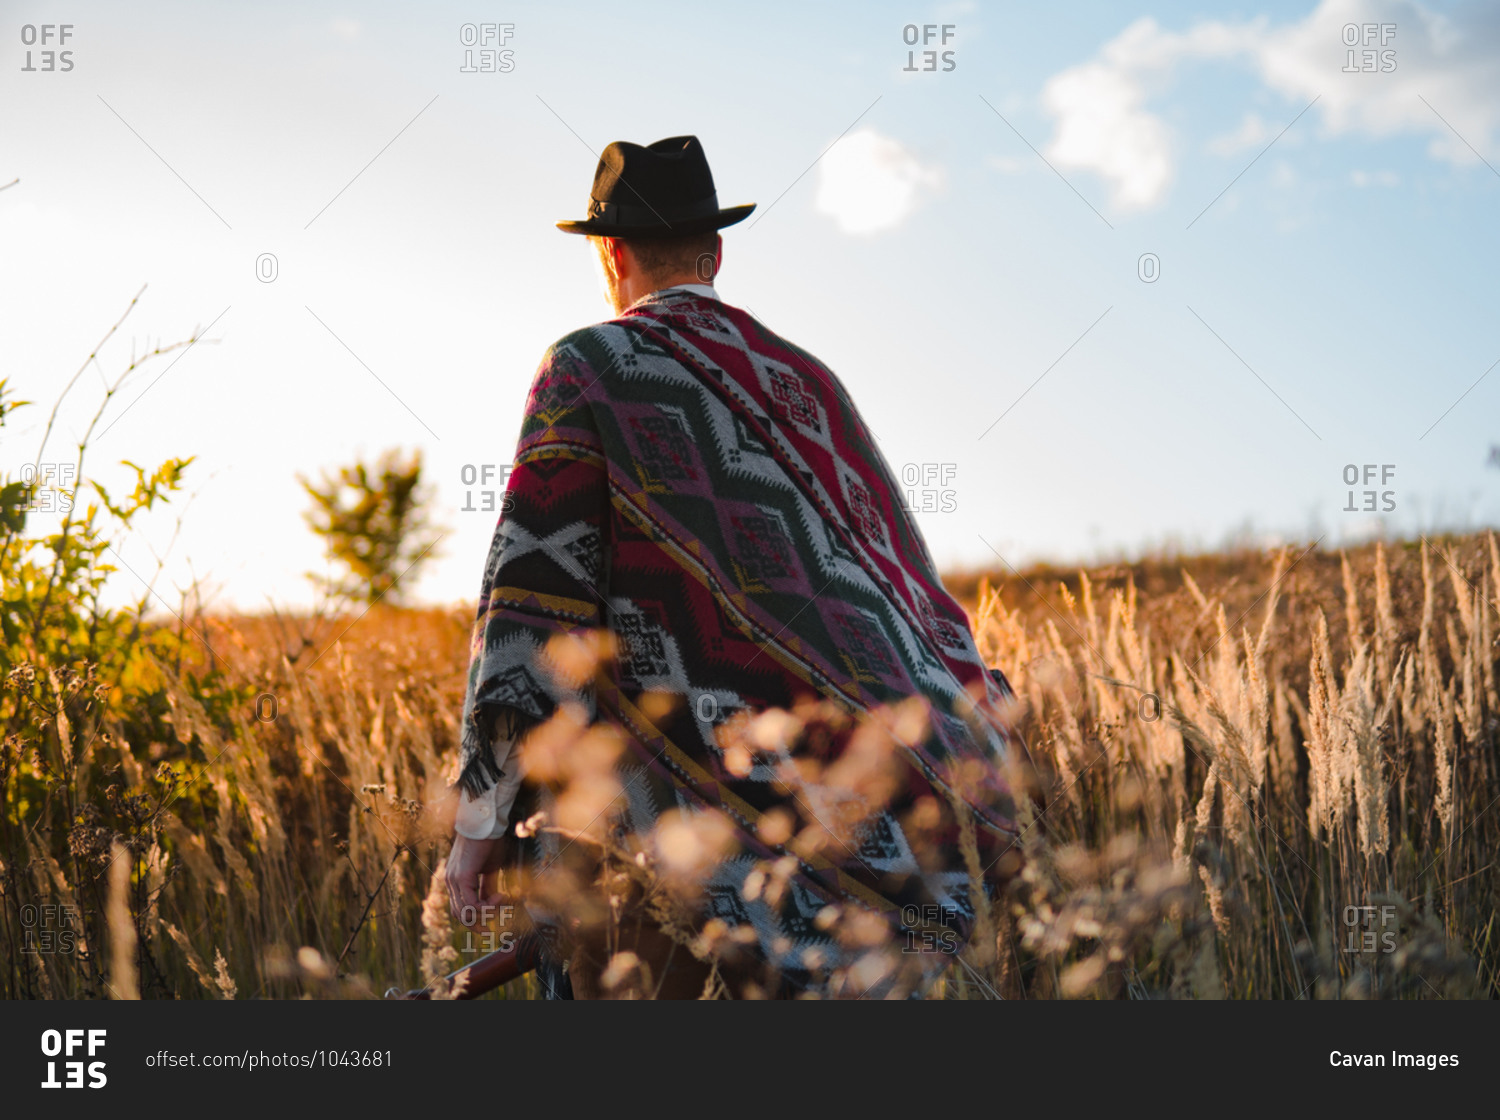 Man in poncho in a country field, atmospheric rural scene